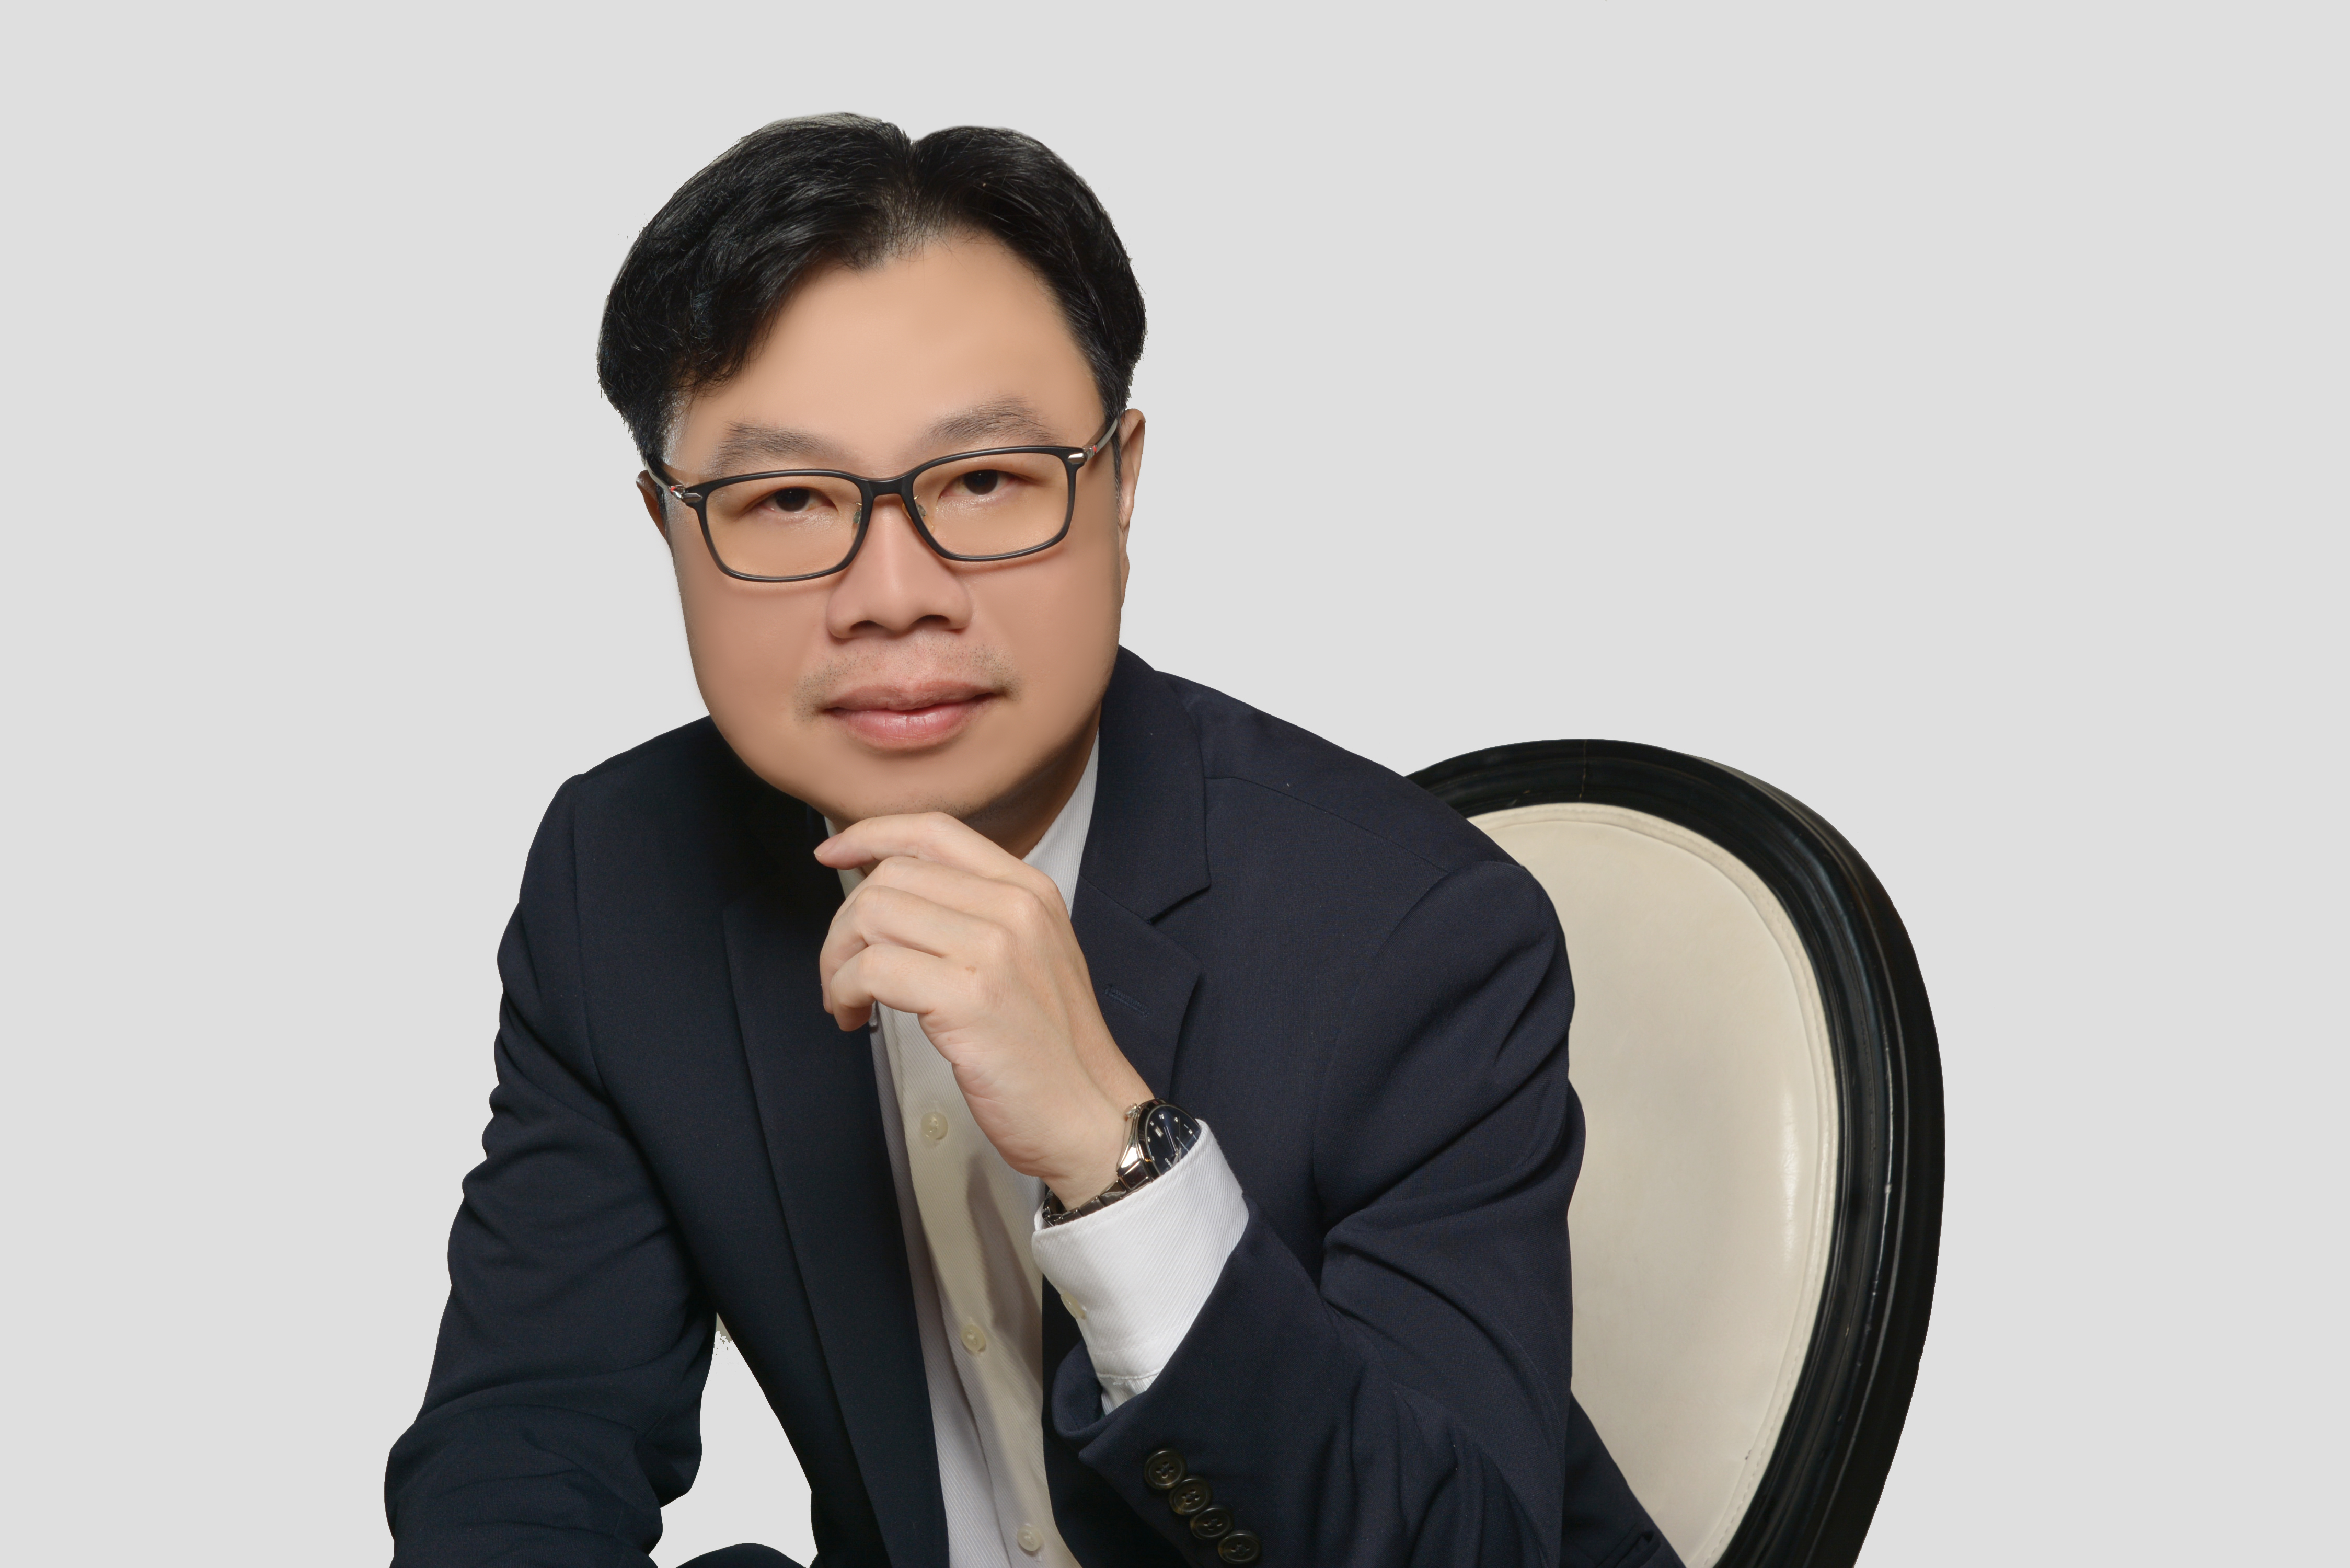 Jimmy Low, CEO of MAG